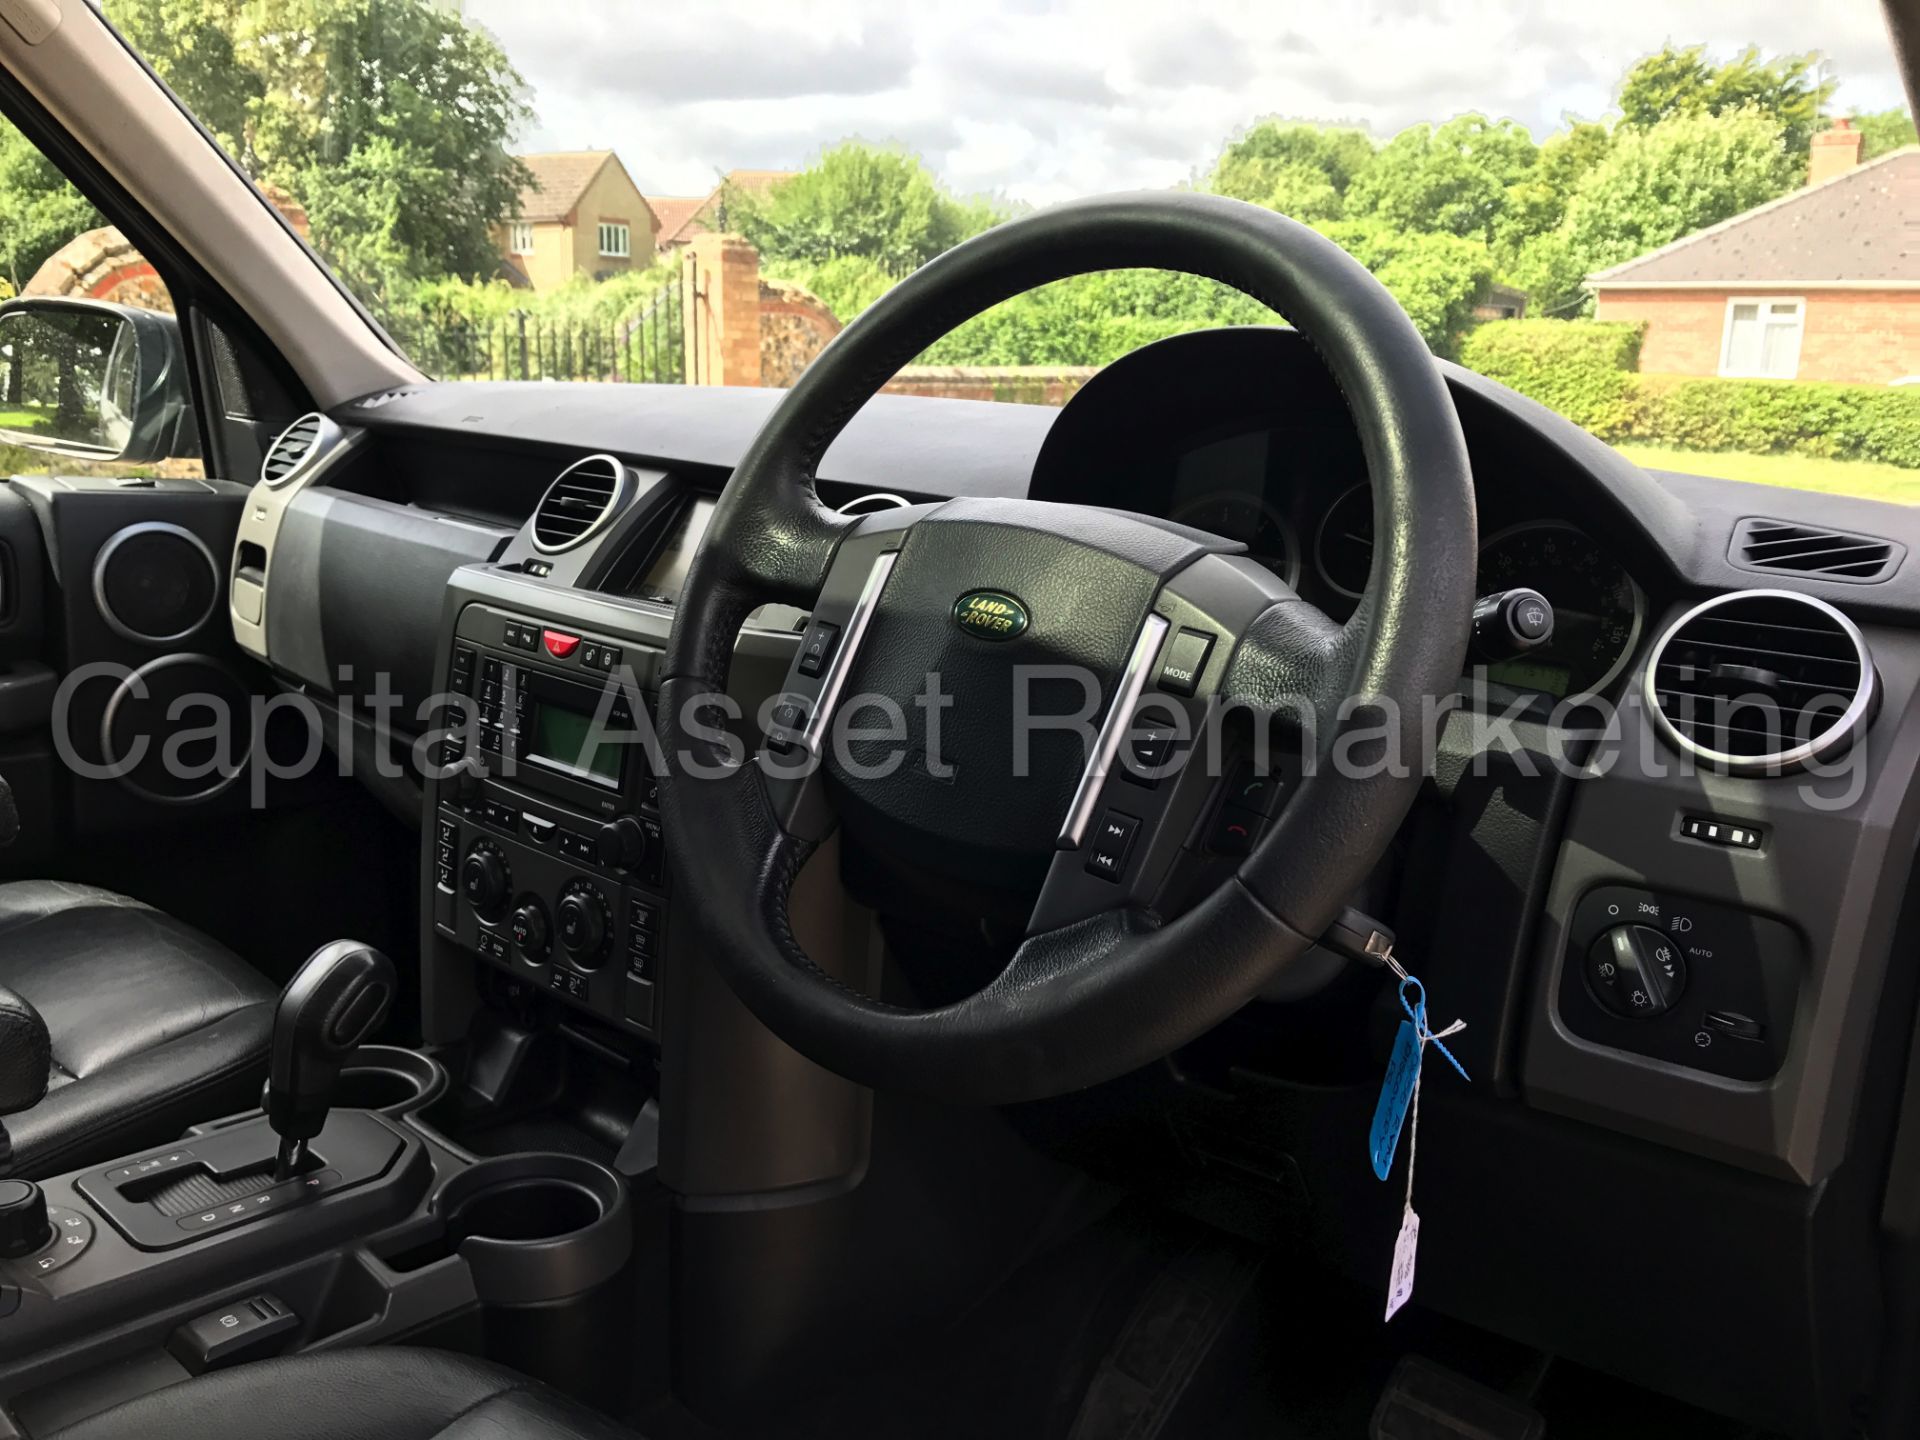 LAND ROVER DISCOVERY 3 'HSE' (2007) 'TDV6 - AUTO - LEATHER - SAT NAV - 7 SEATER' **MASSIVE SPEC** - Image 21 of 34